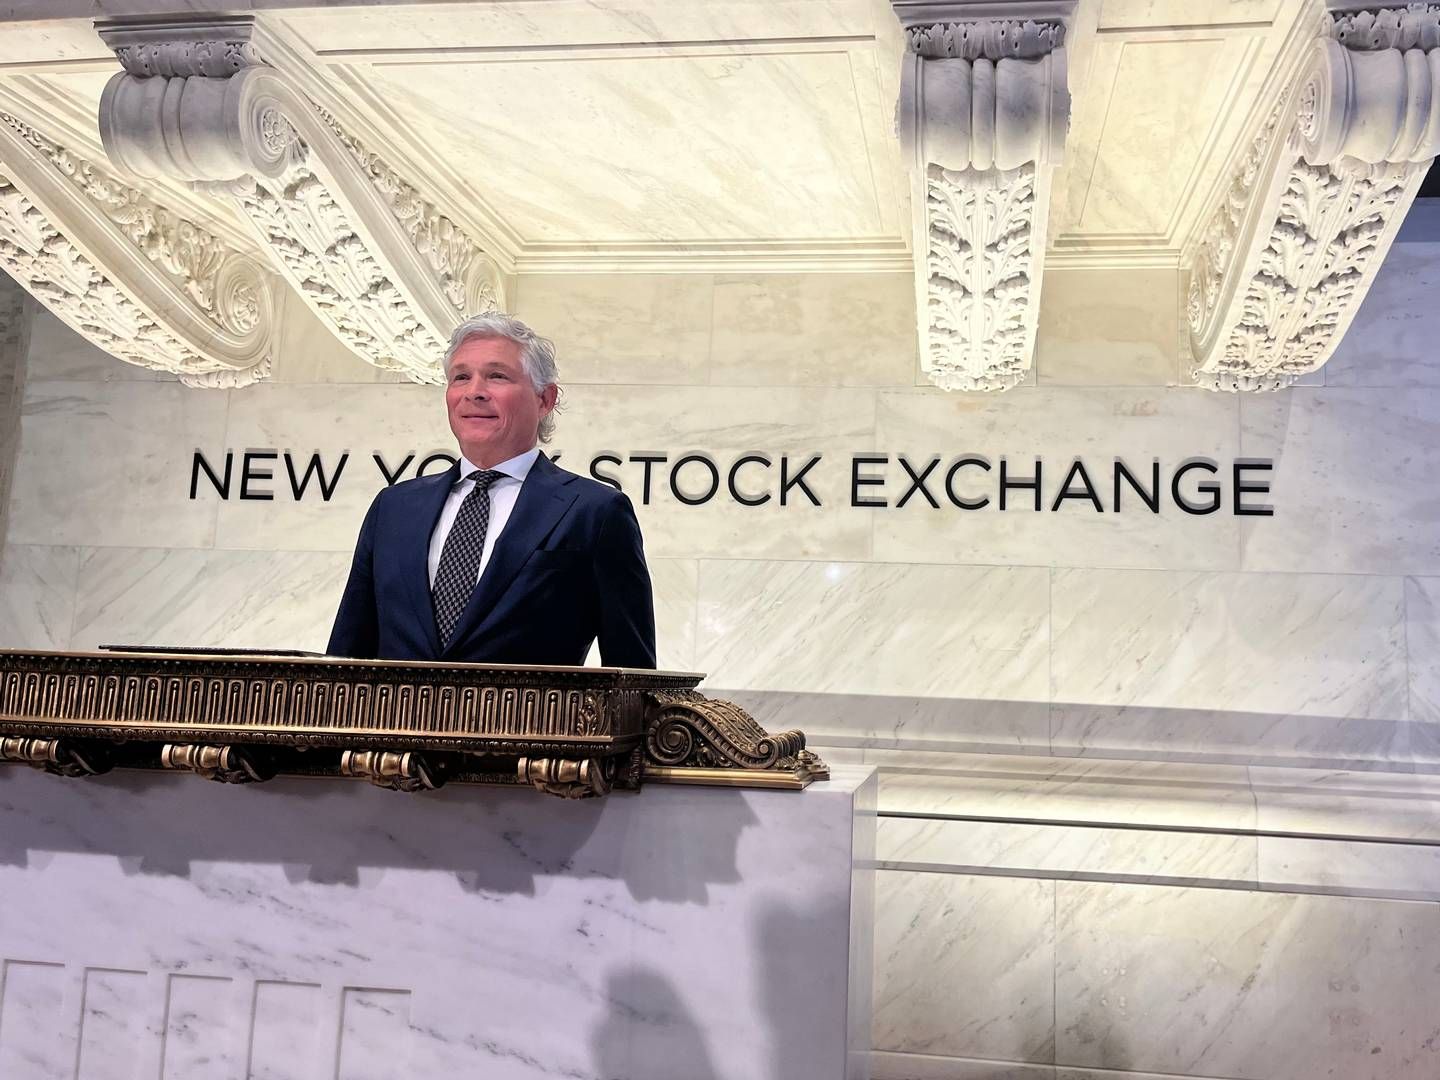 Mikael Skov, founder and CEO of Hafnia, rang the bell at the New York Stock Exchange on Tuesday to mark the opening of trading with the tanker operator's shares. | Photo: Af Sofie Højlund